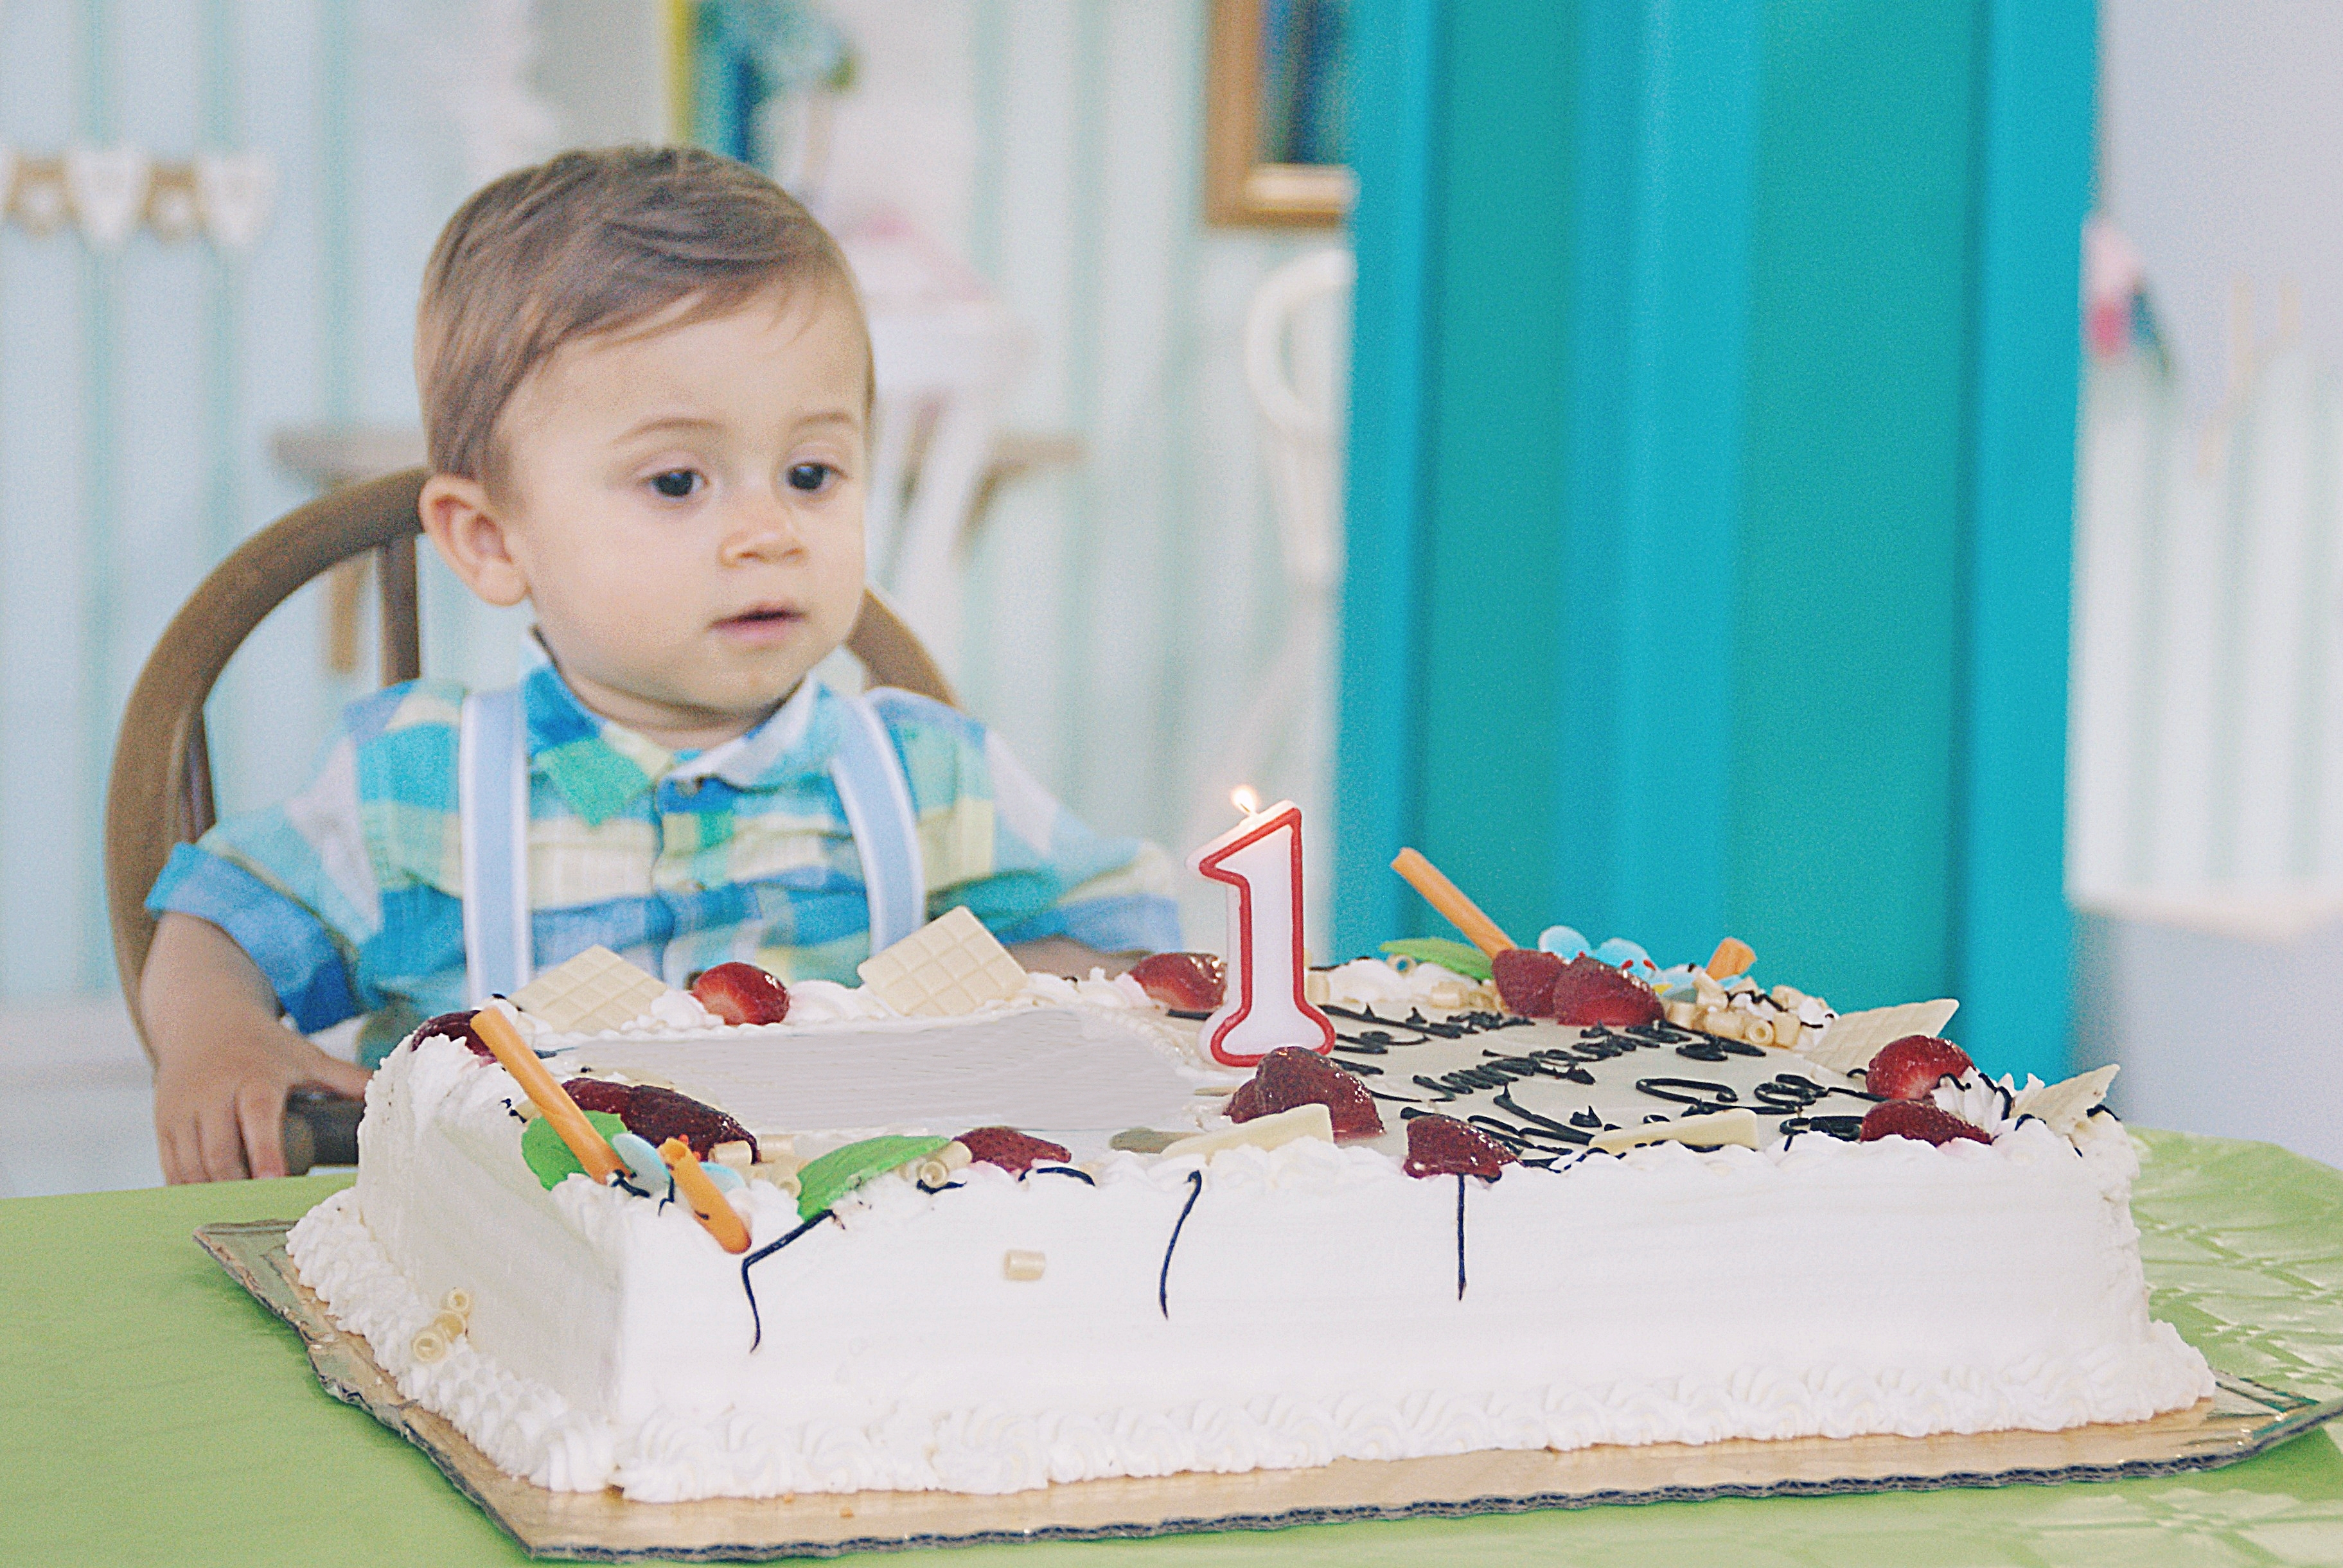 Portrait of a toddler sitting at a table ready to blow out a candle on his birthday cake | Source: Getty Images